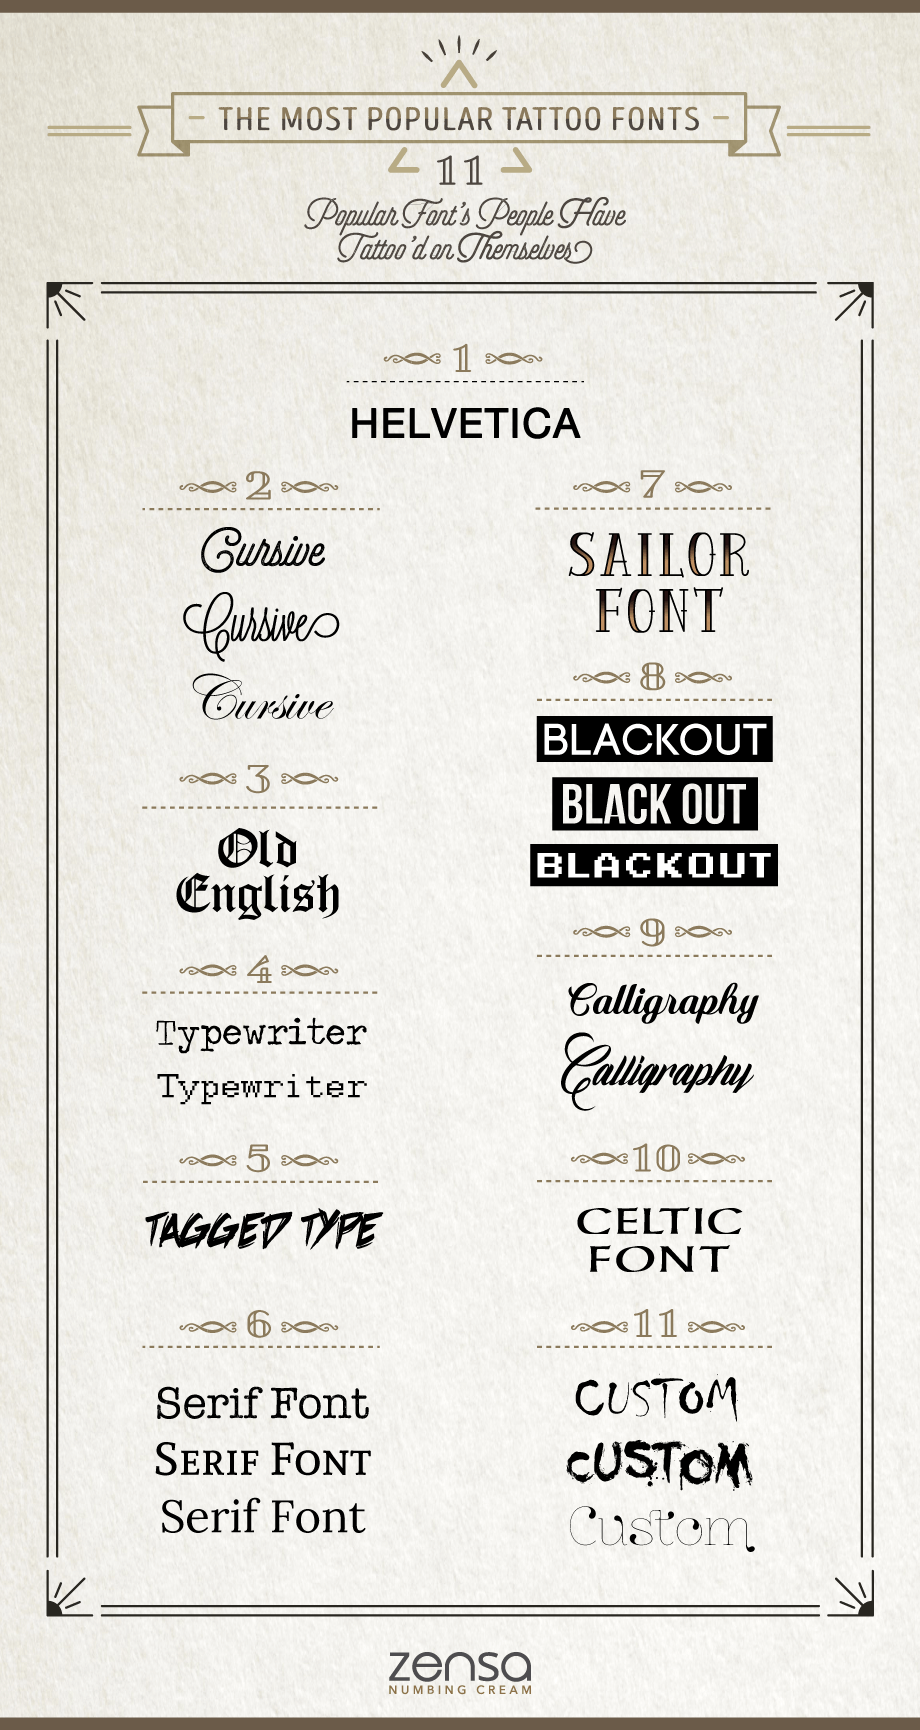 Learn 98 about best tattoo fonts latest  indaotaonec